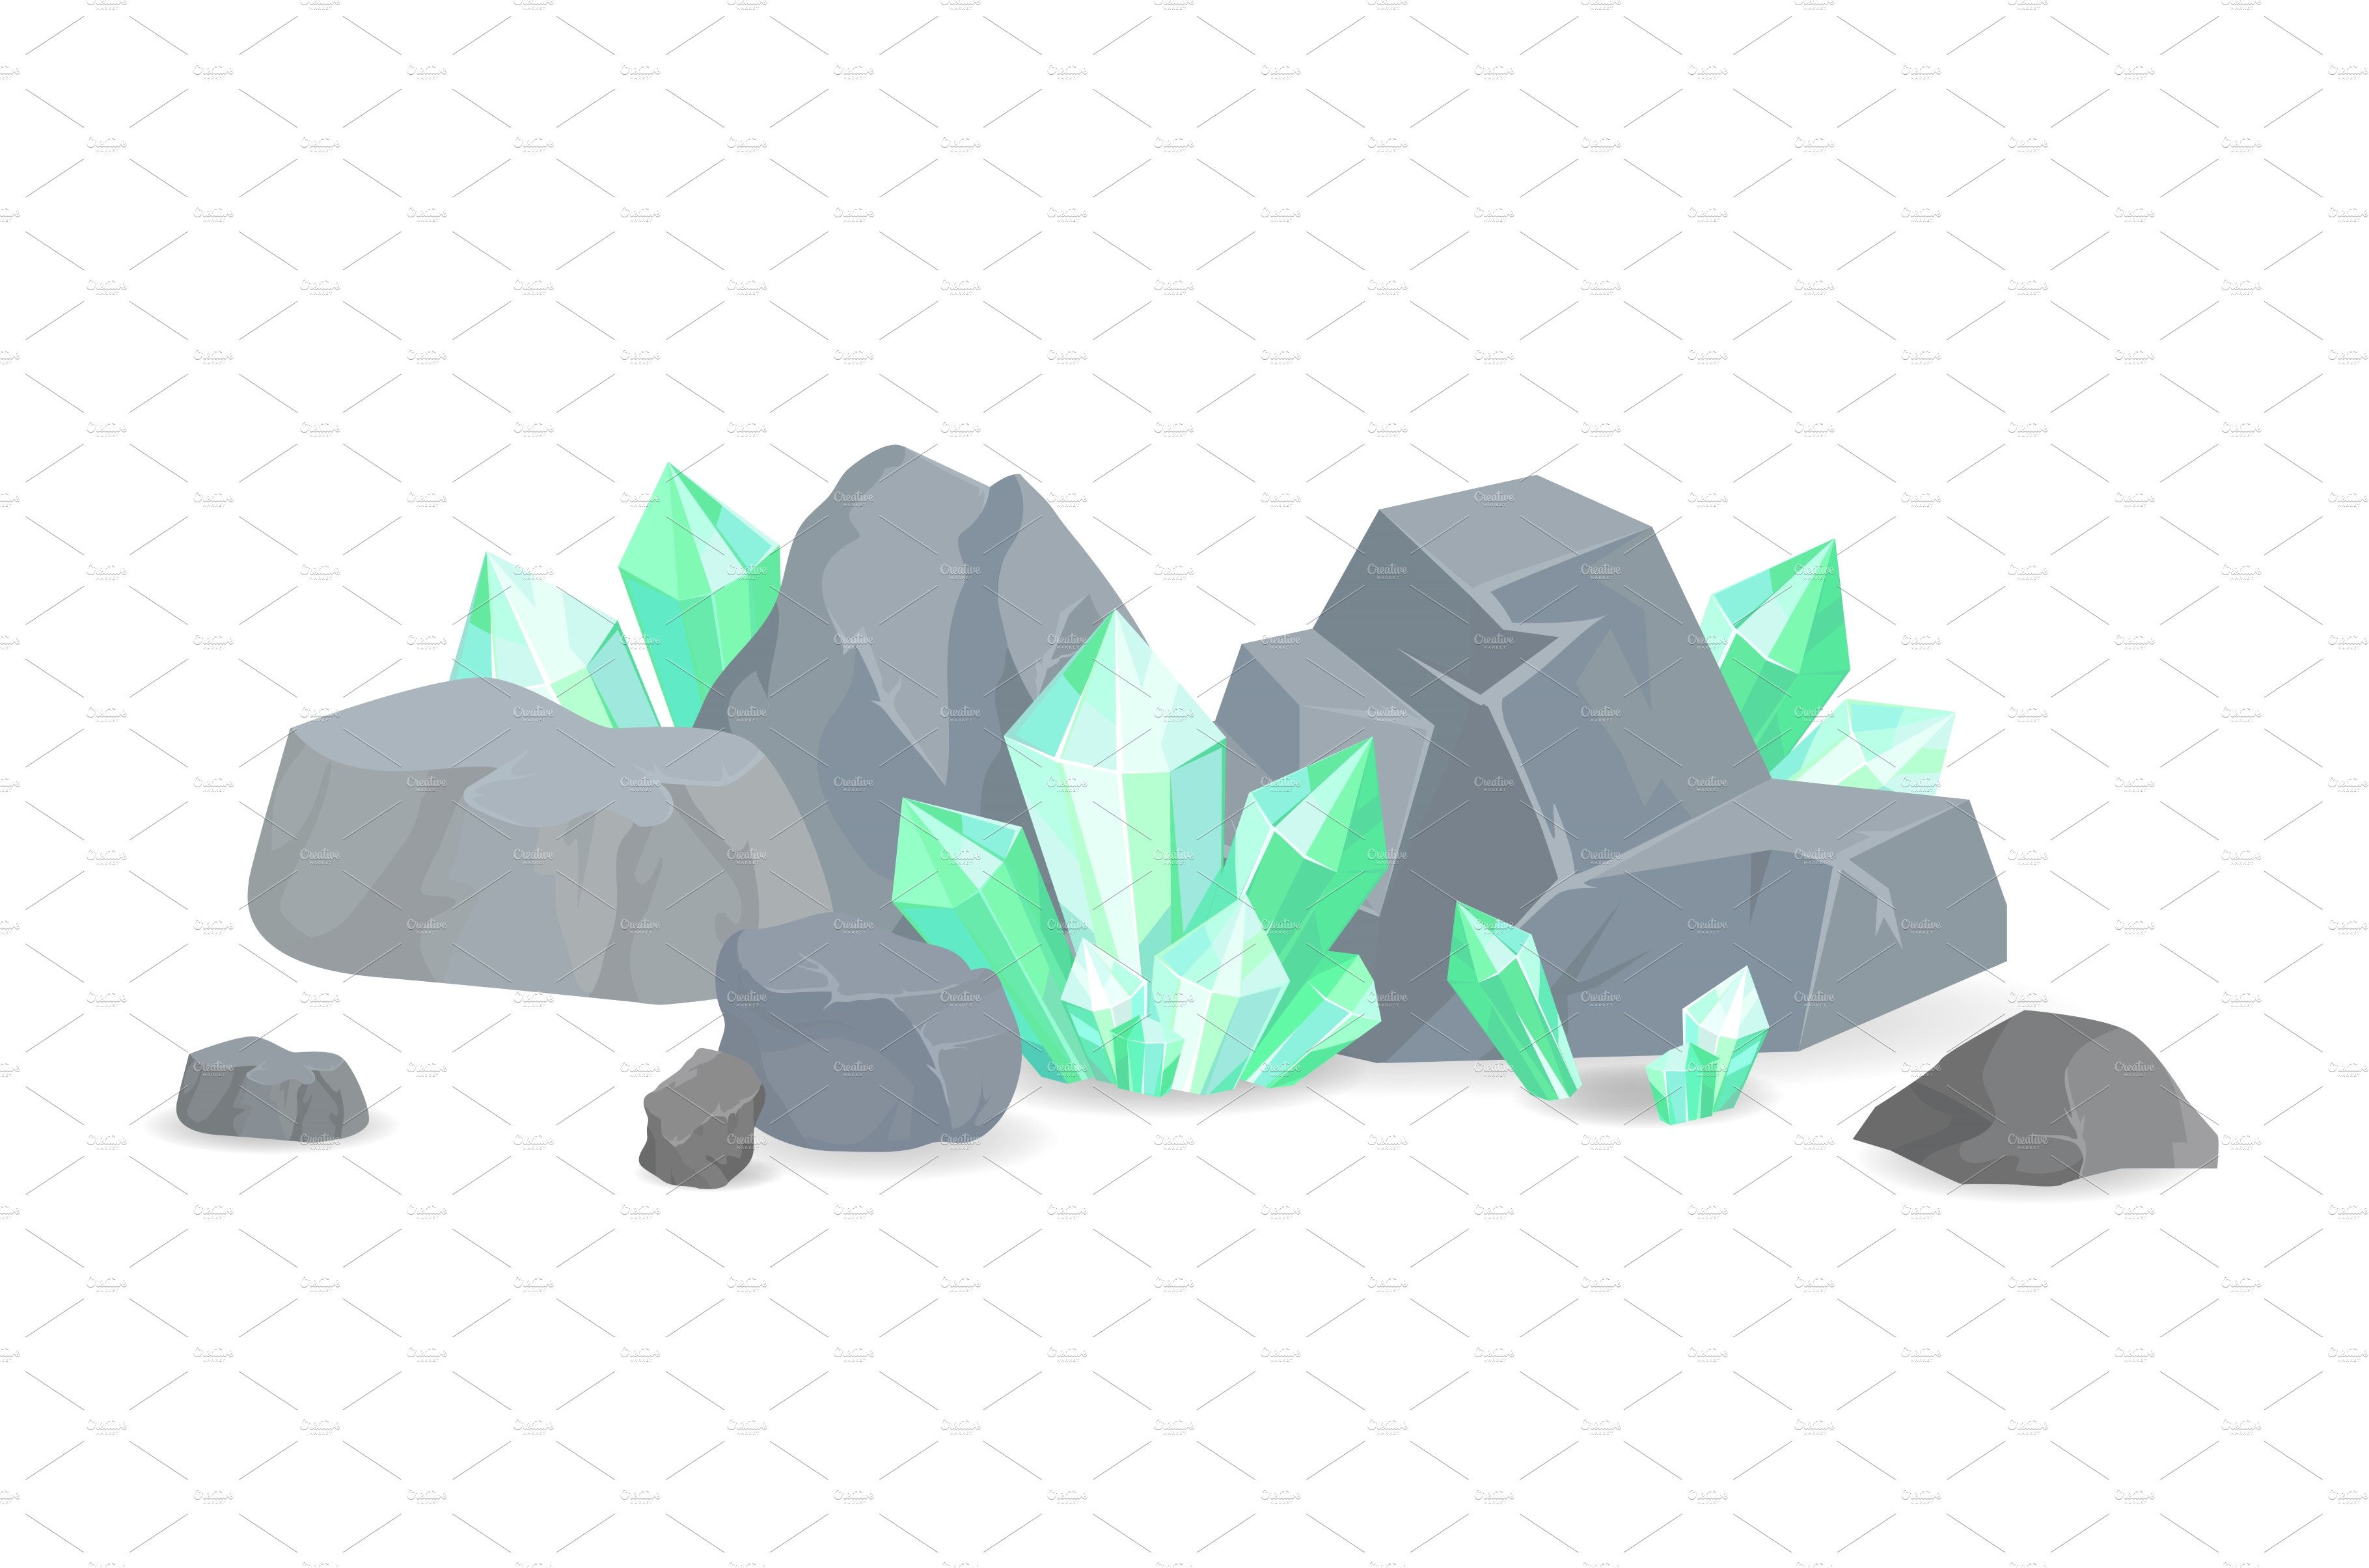 Green Crystals Among Stones cover image.